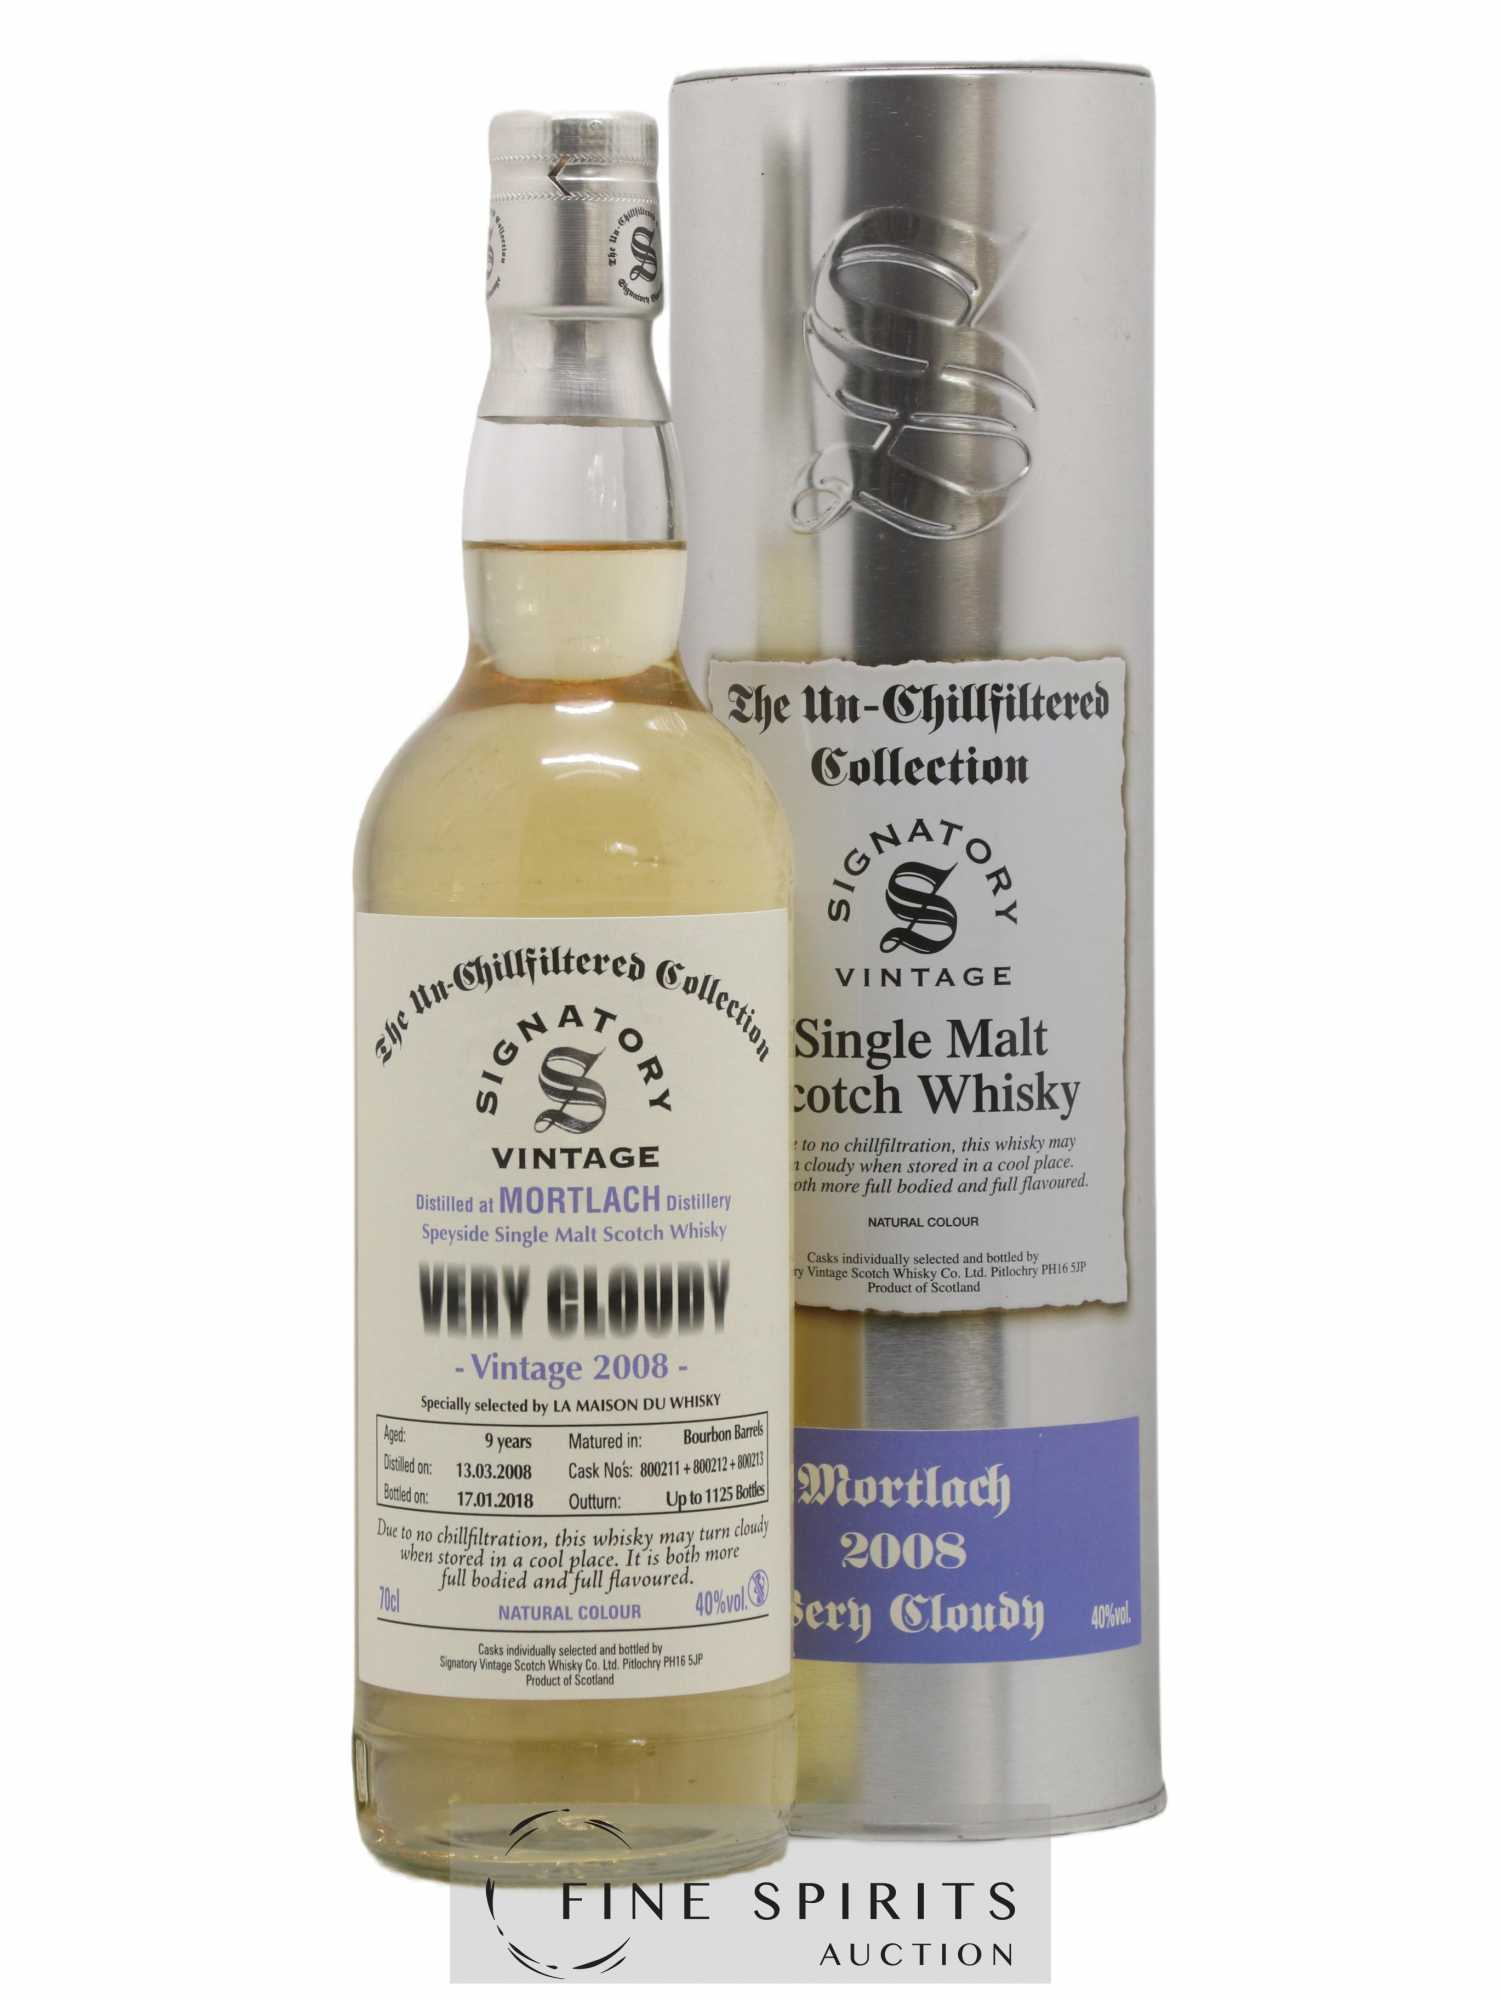 Mortlach 9 years 2008 Signatory Vintage Very Cloudy Casks n°800211-2-3 - One of 1125 - bottled 2018 The Un-Chillfiltered Collection